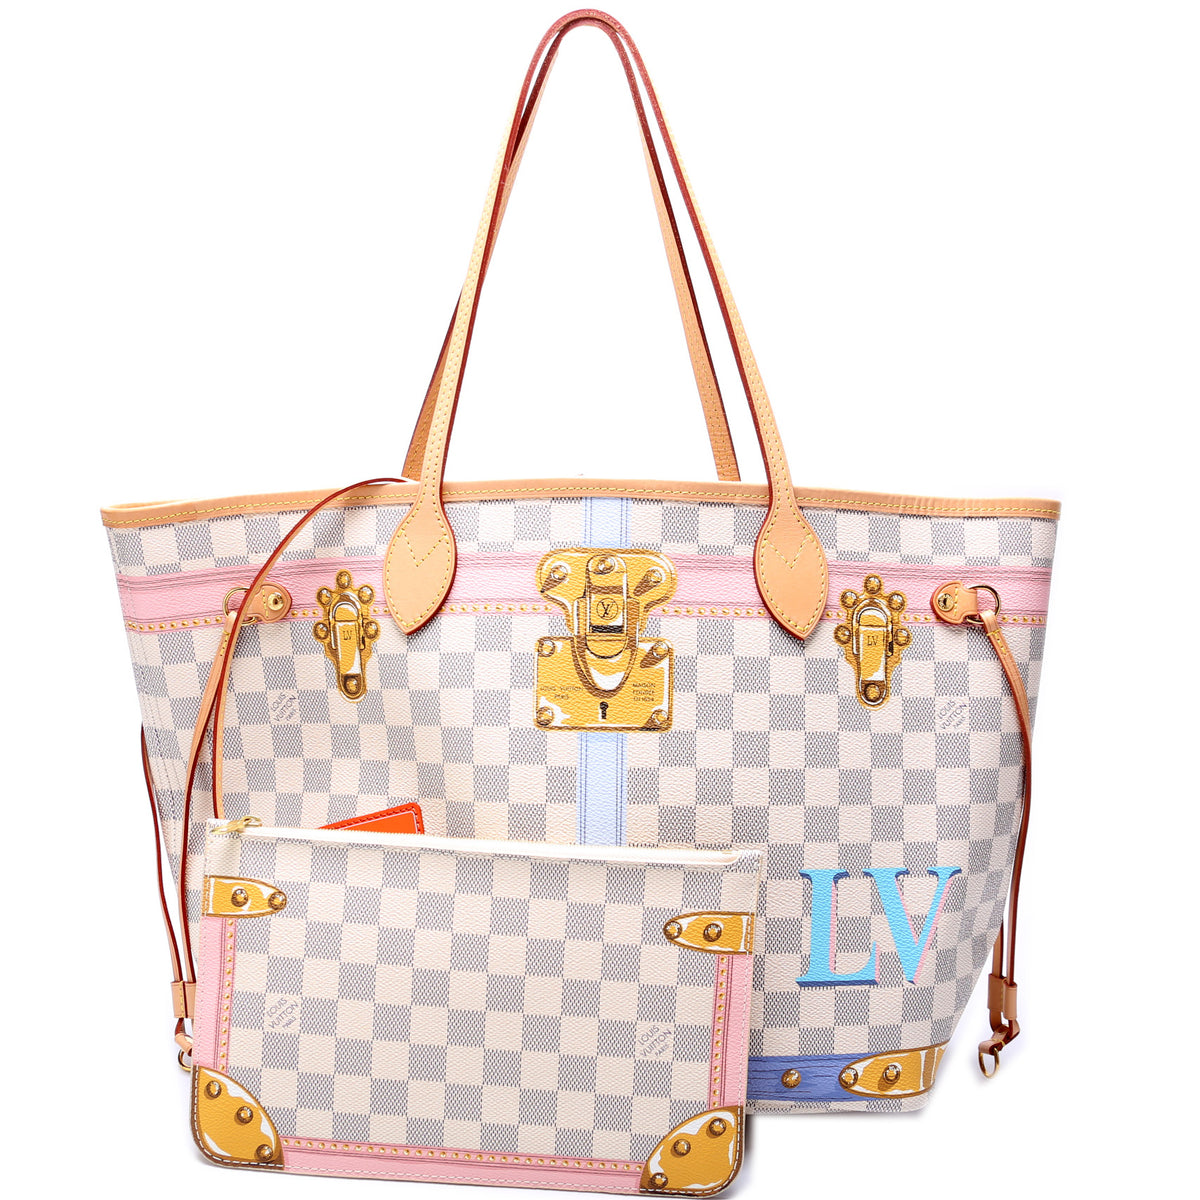 Louis+Vuitton+Neverfull+Tote+MM+Multicolor+Jacquard for sale online